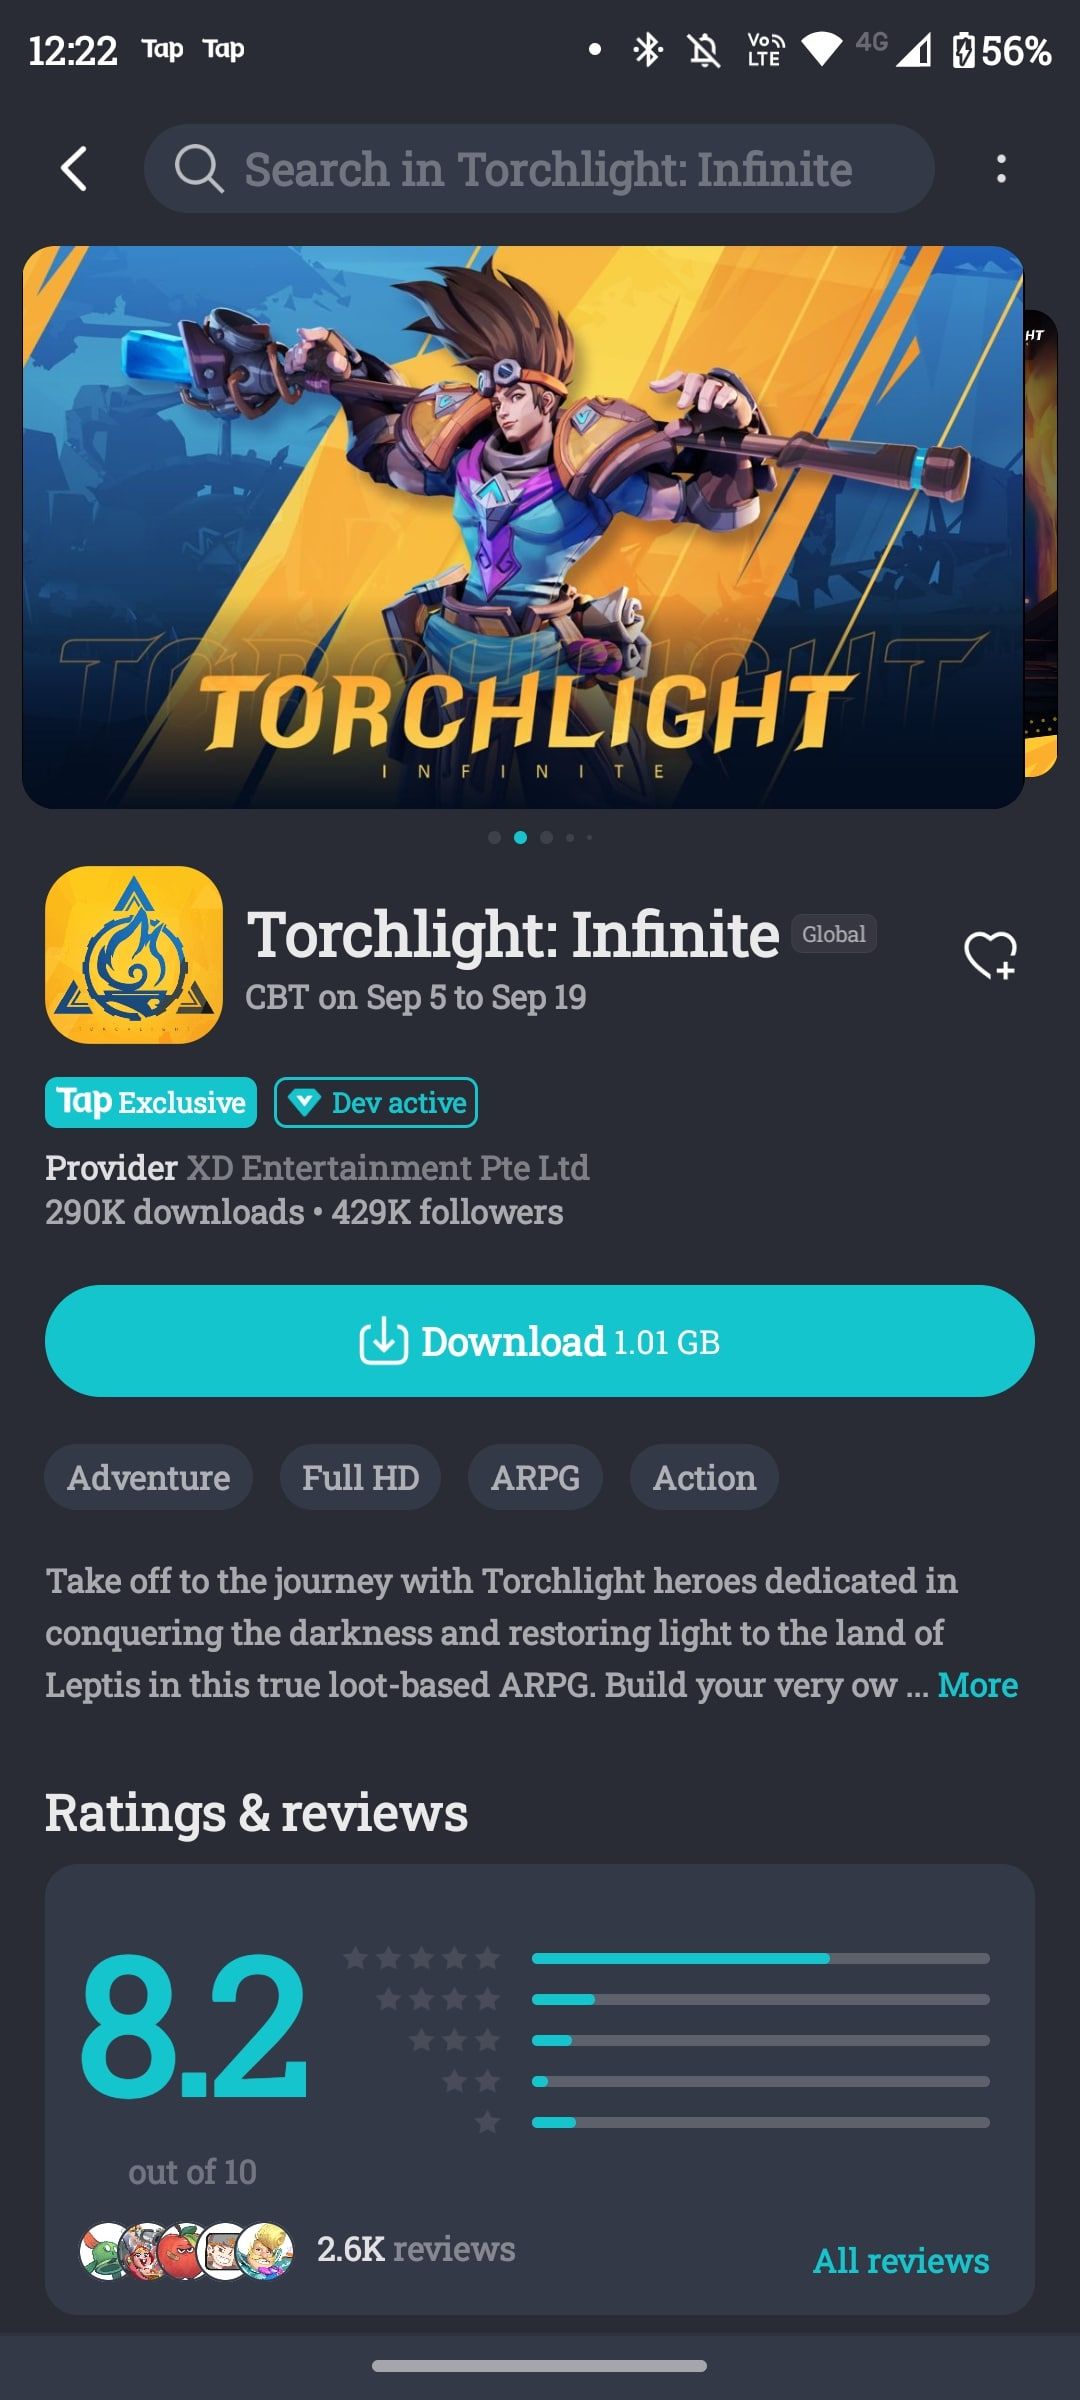 Torchlight: Infinite TapTap download page